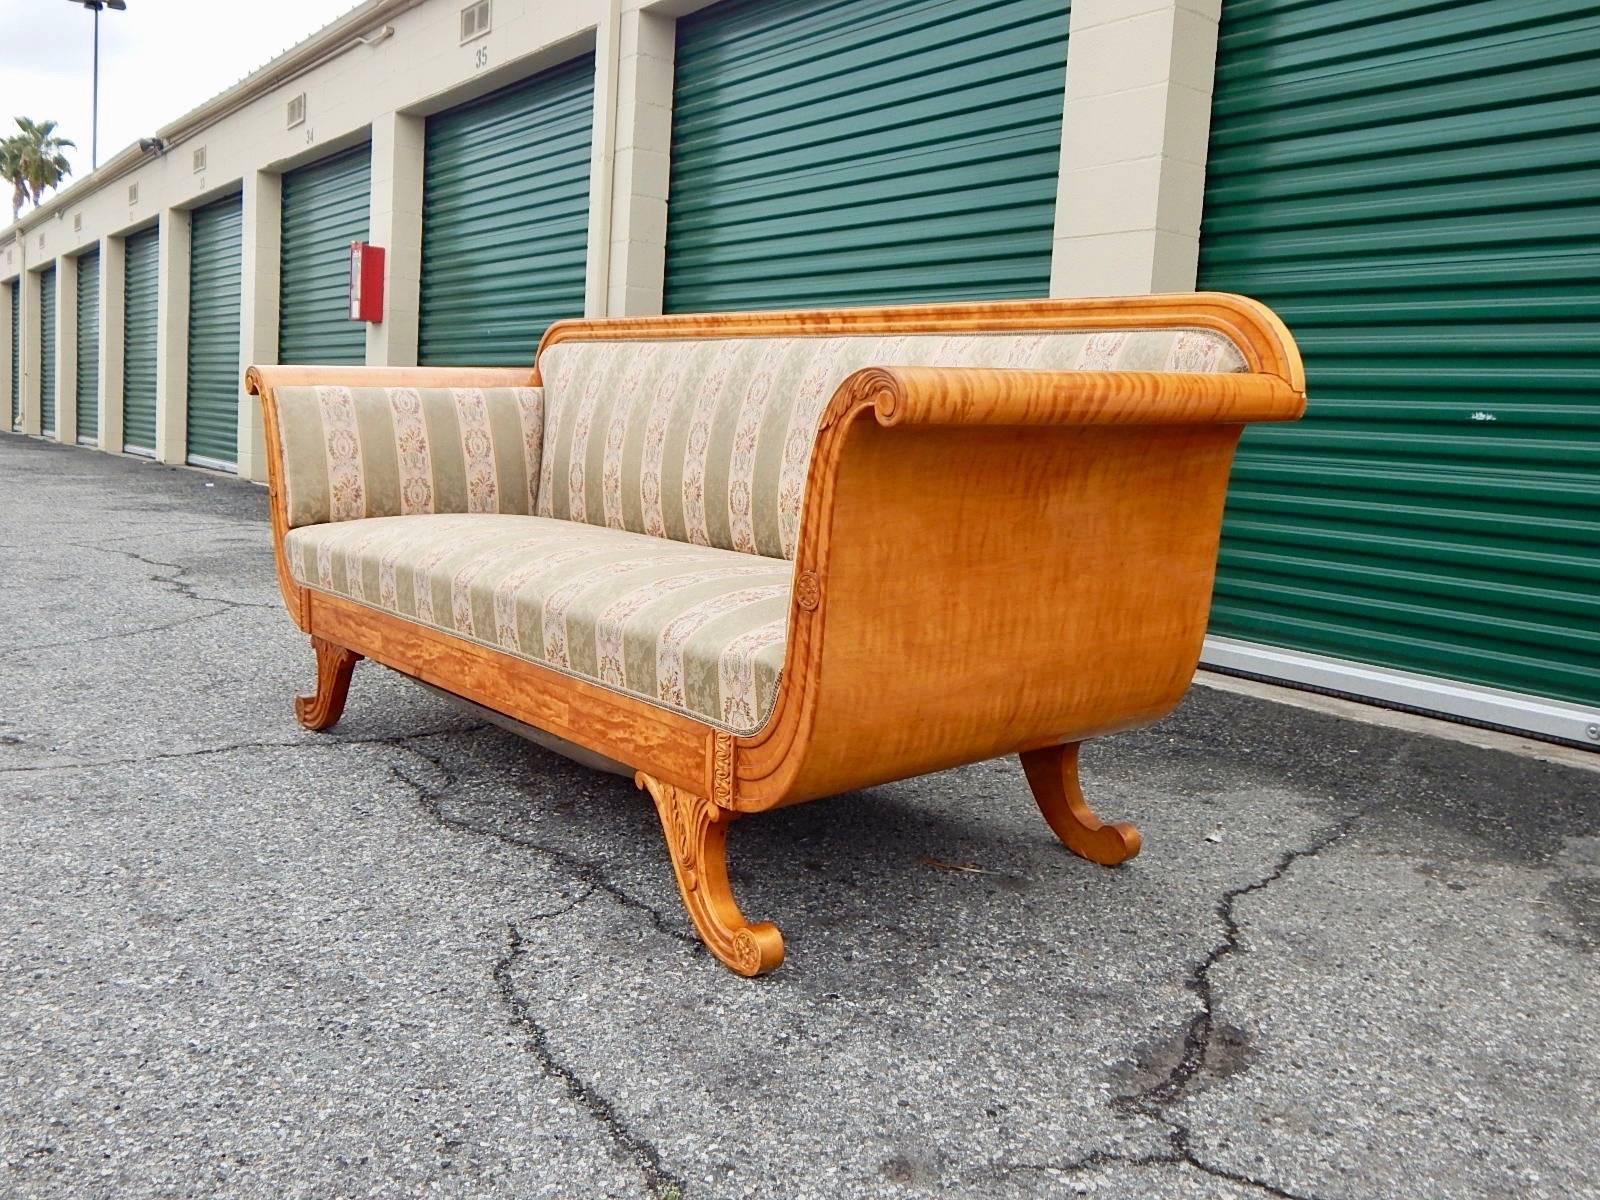 Early 20th Century Biedermeier Revival Sofa with Panelled Sides in Golden Birch, Sweden, 1920s For Sale